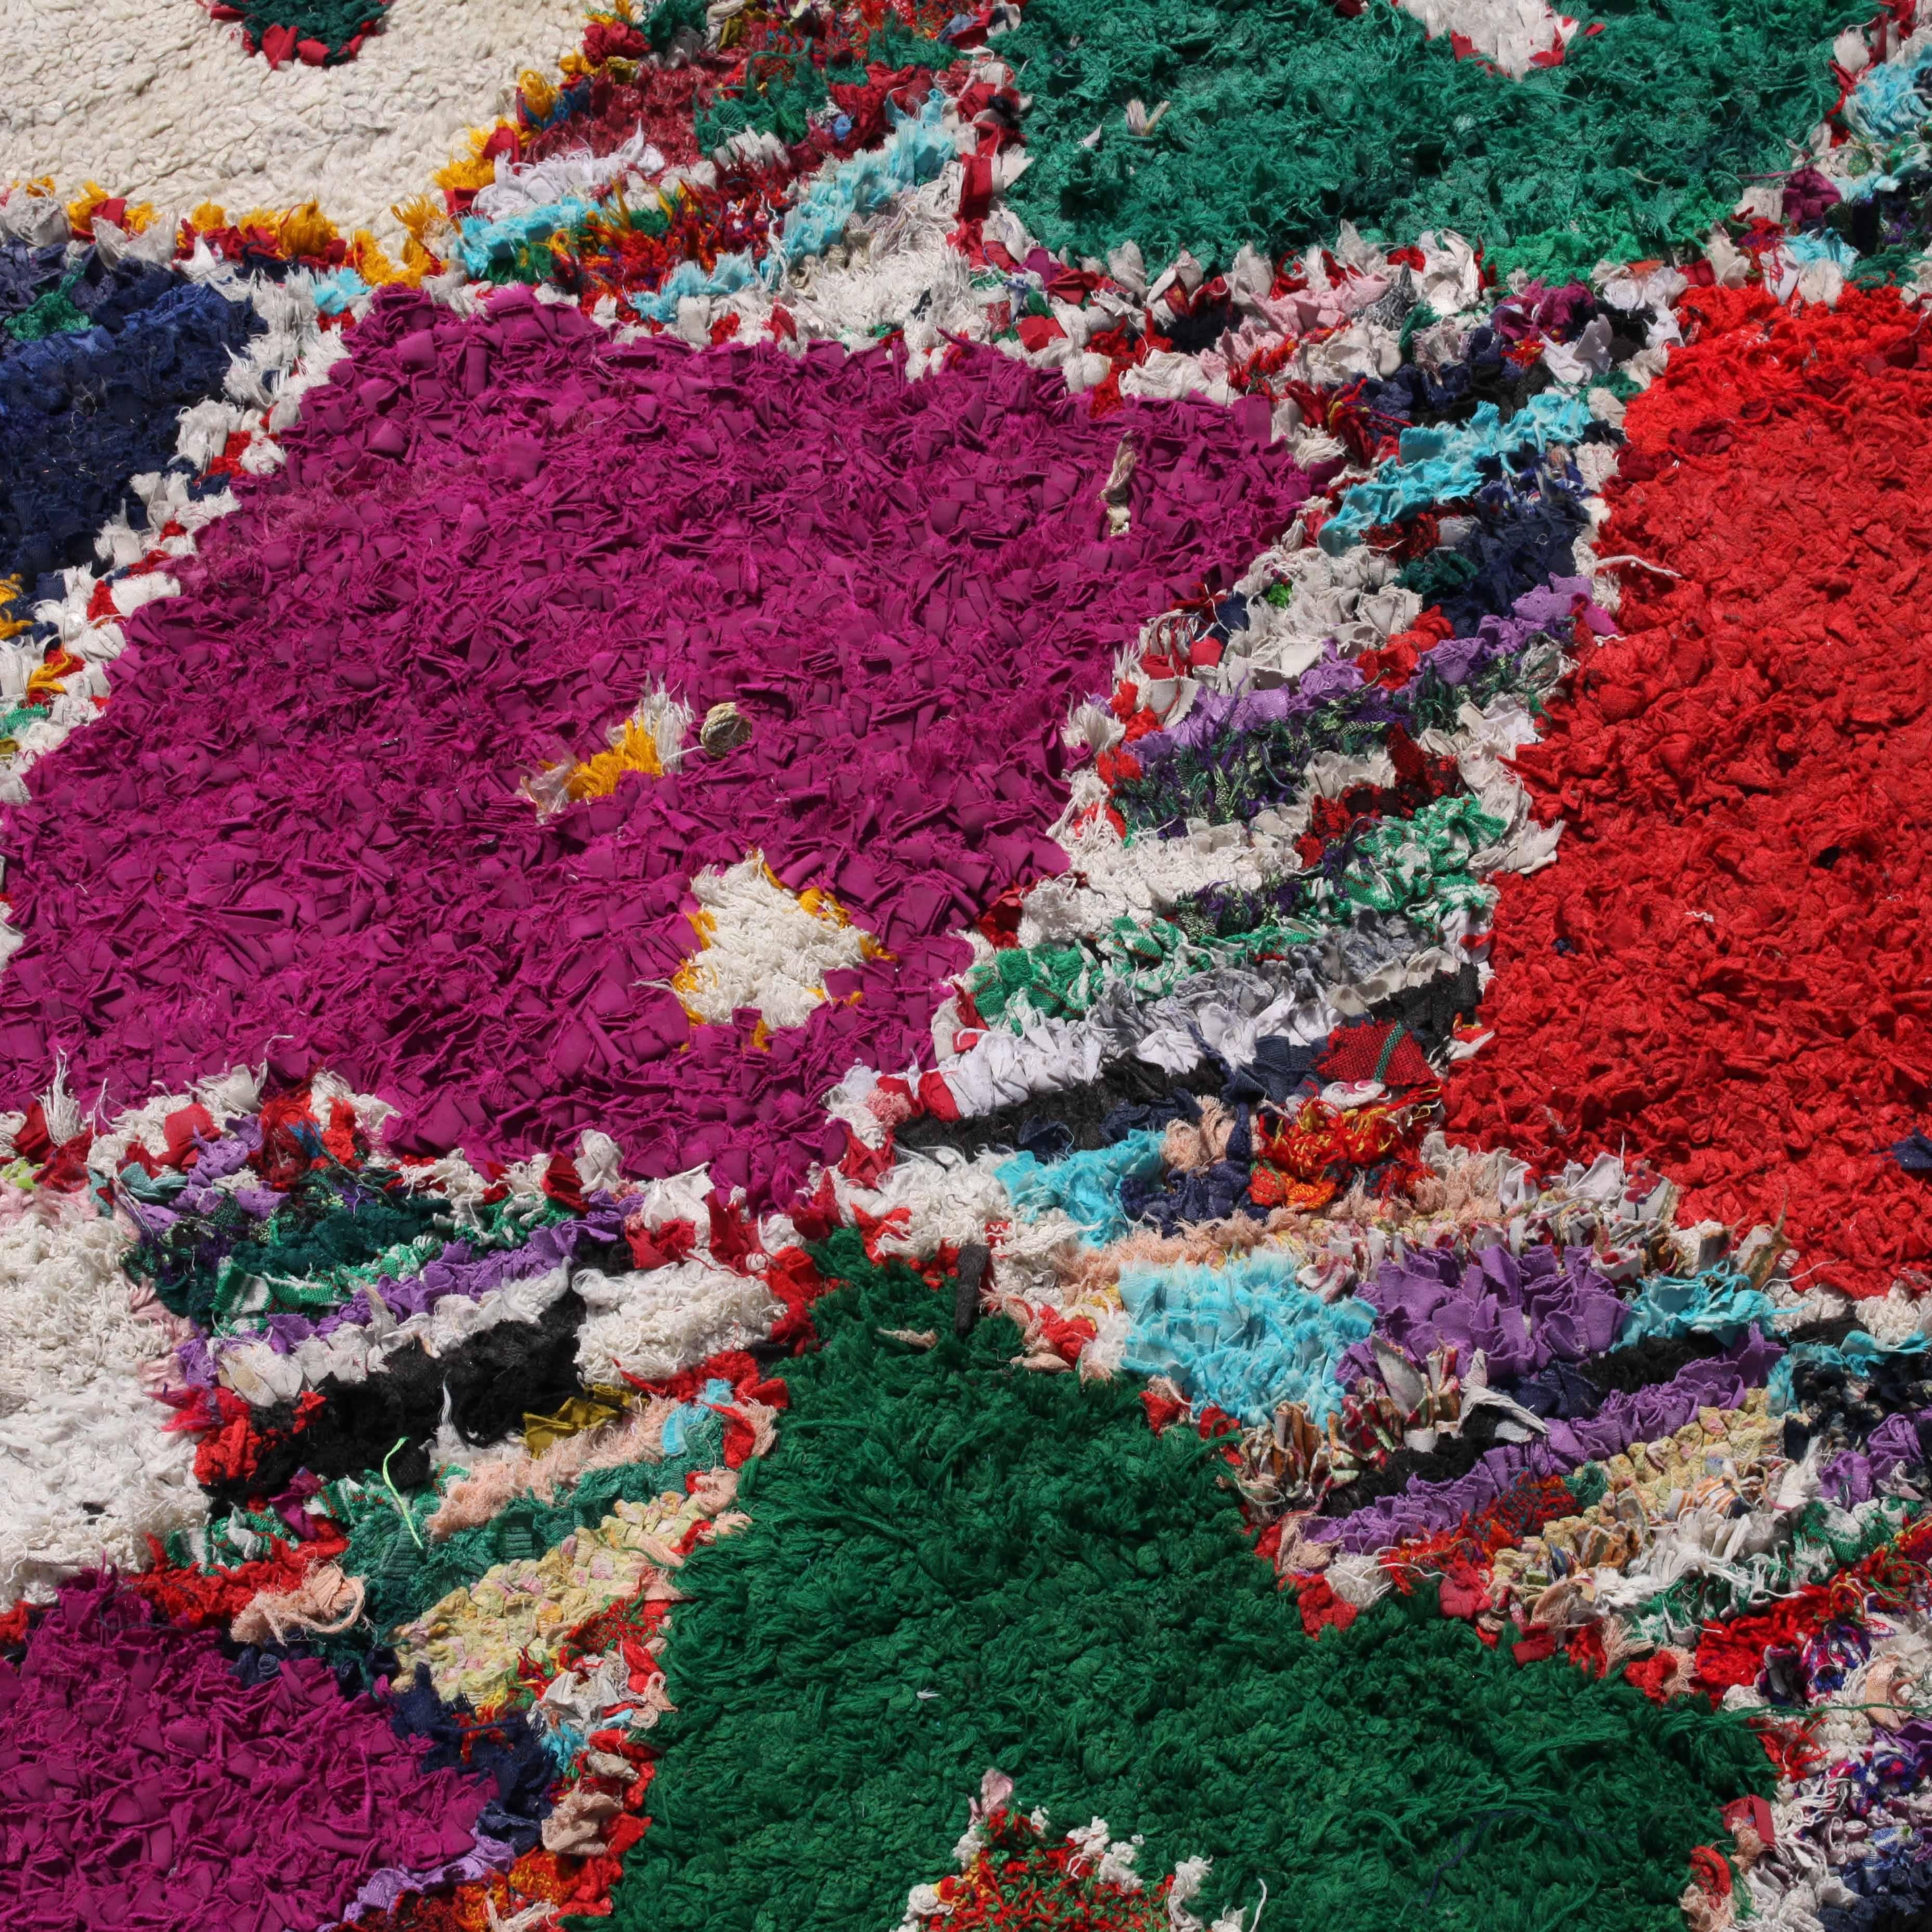 This very bold and invigorating handwoven rug from Morocco brings every room to life. The materials used include recycled rag strips and yarns from a variety of found textile remnants including wool, cotton, synthetic fibers.

From the late 1980s,